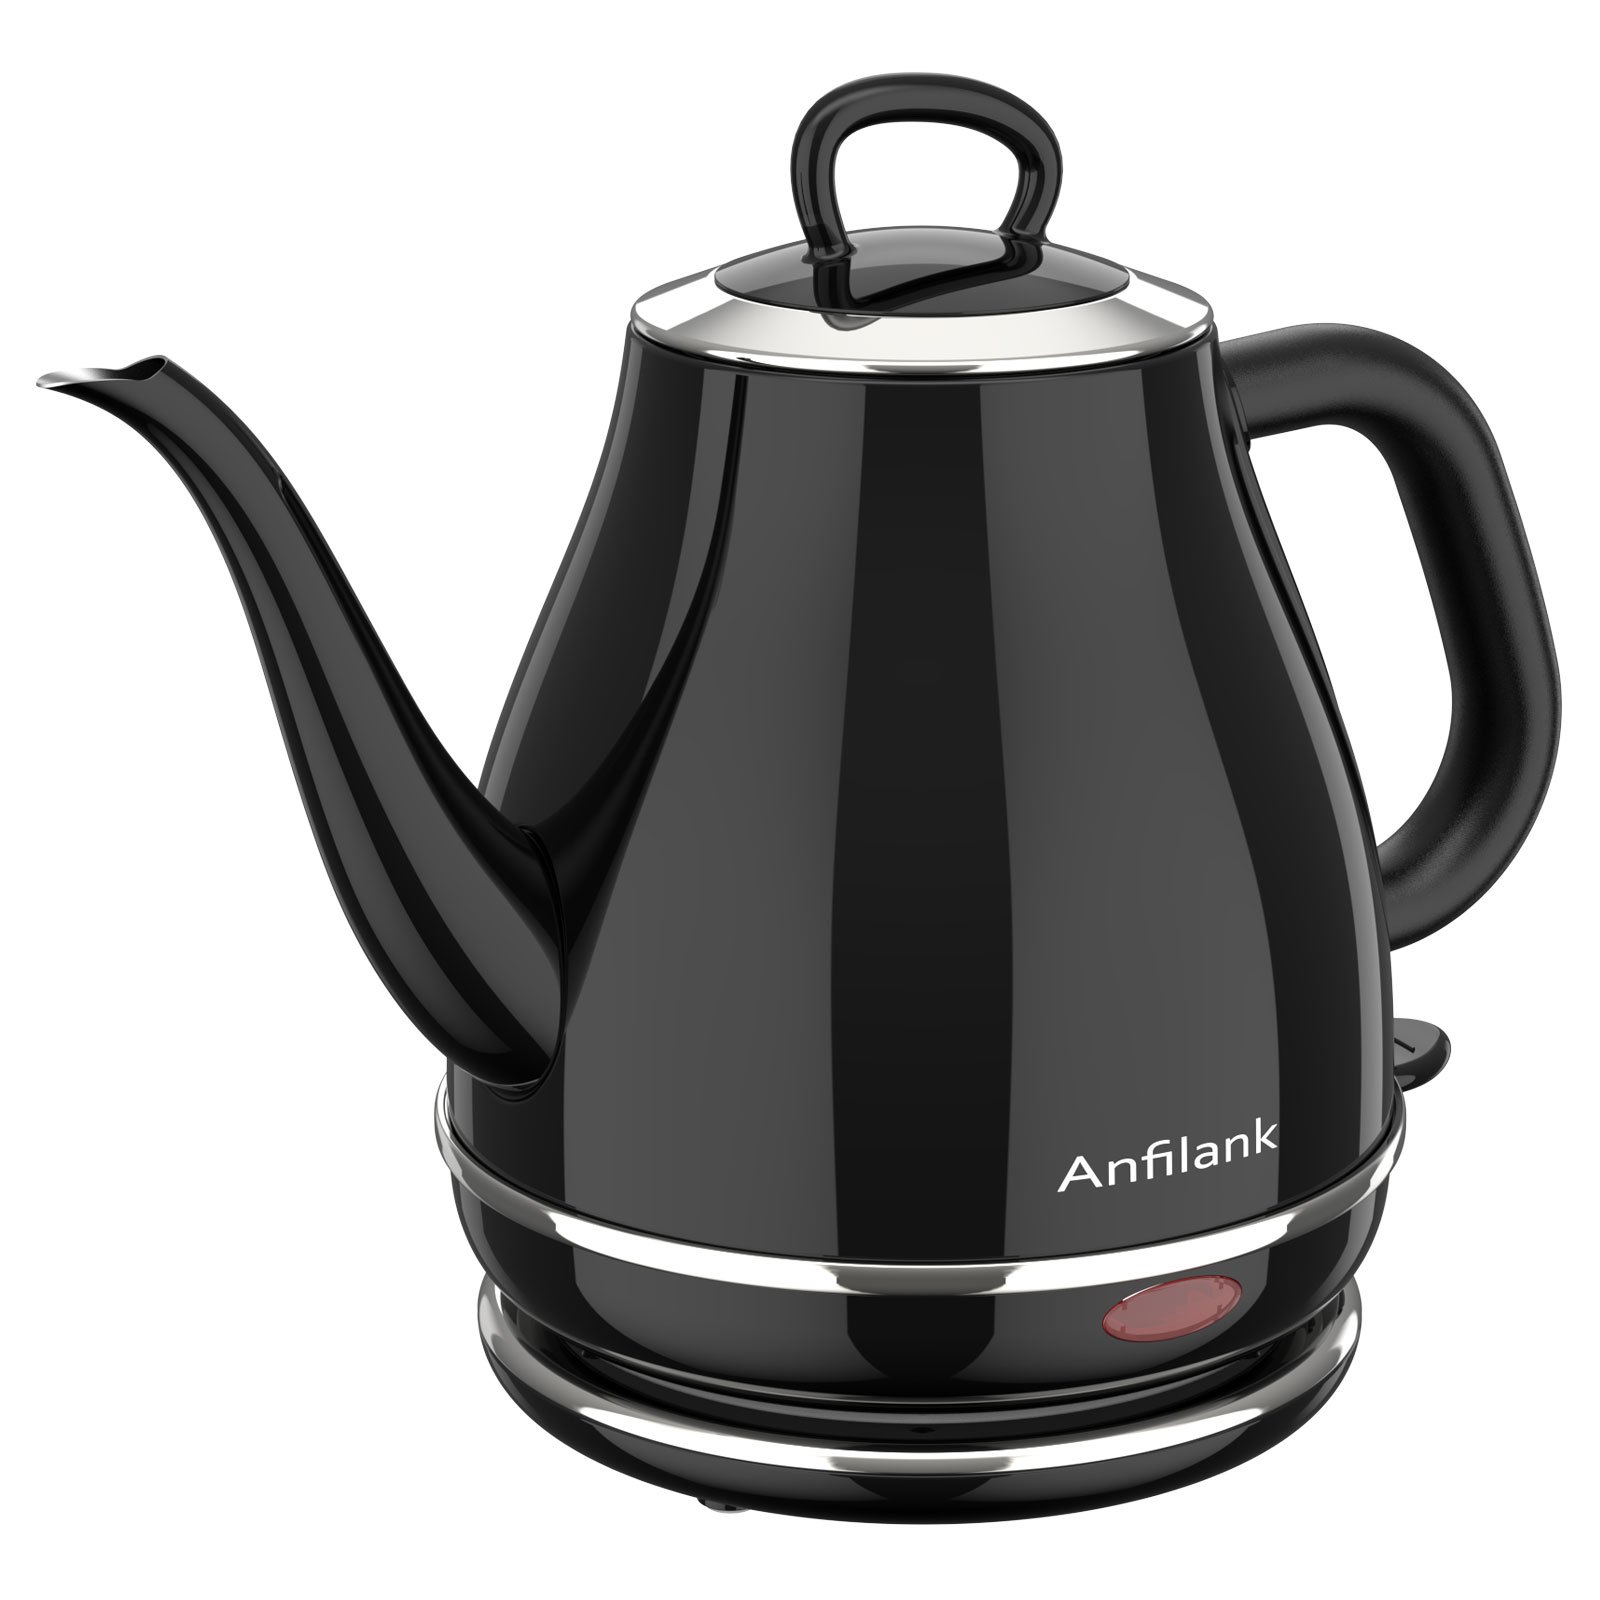 Electric Gooseneck Kettle - 1L, 120 Volt, Stainless Steel for coffee tea